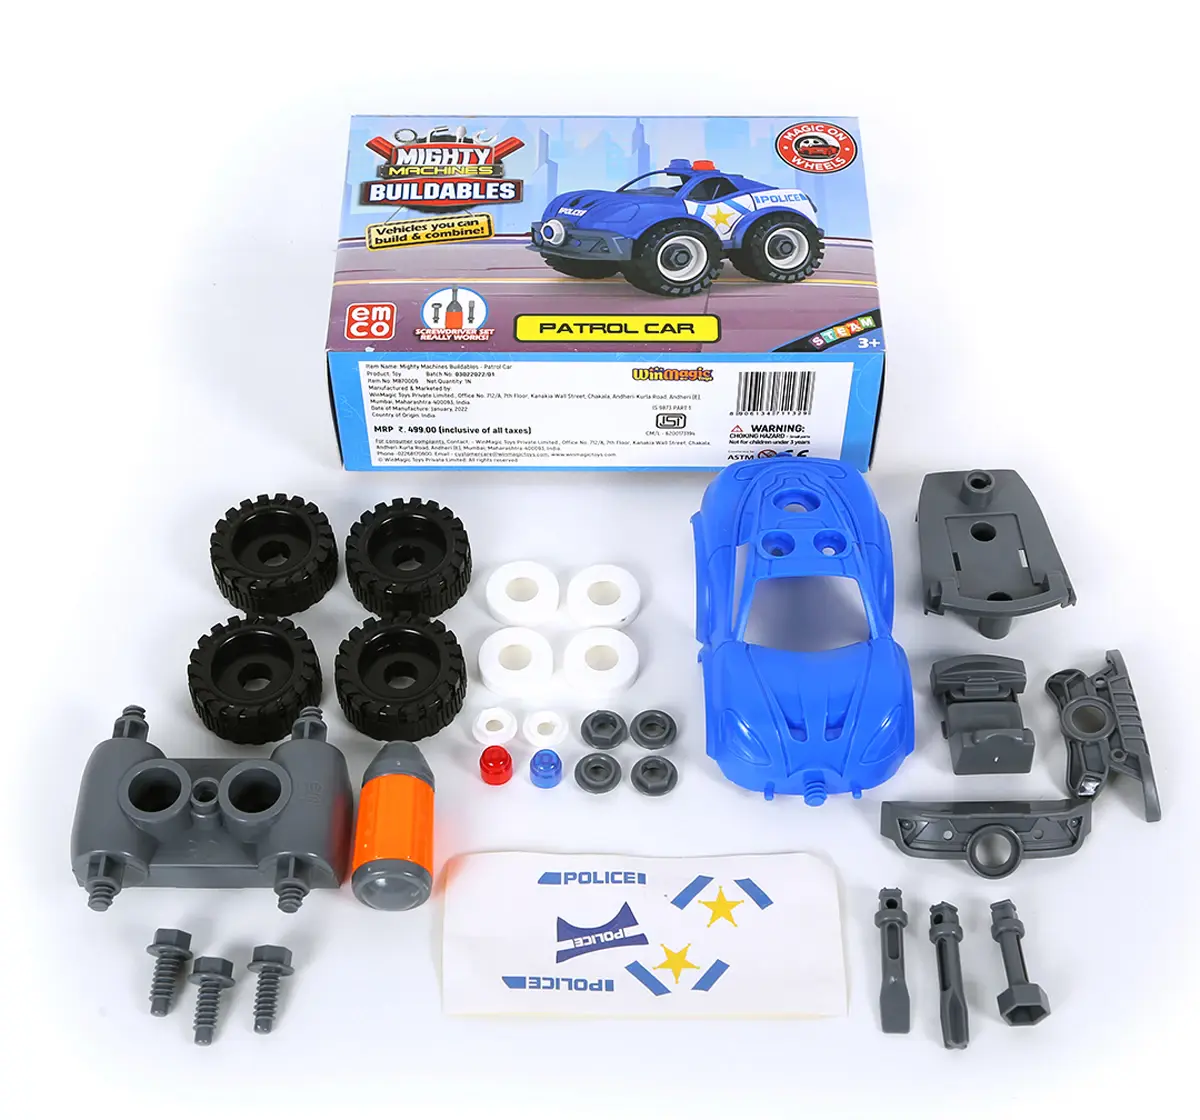 Mighty Machines Patrol Car Construction Vechile for kids 3Y+, Multicolour